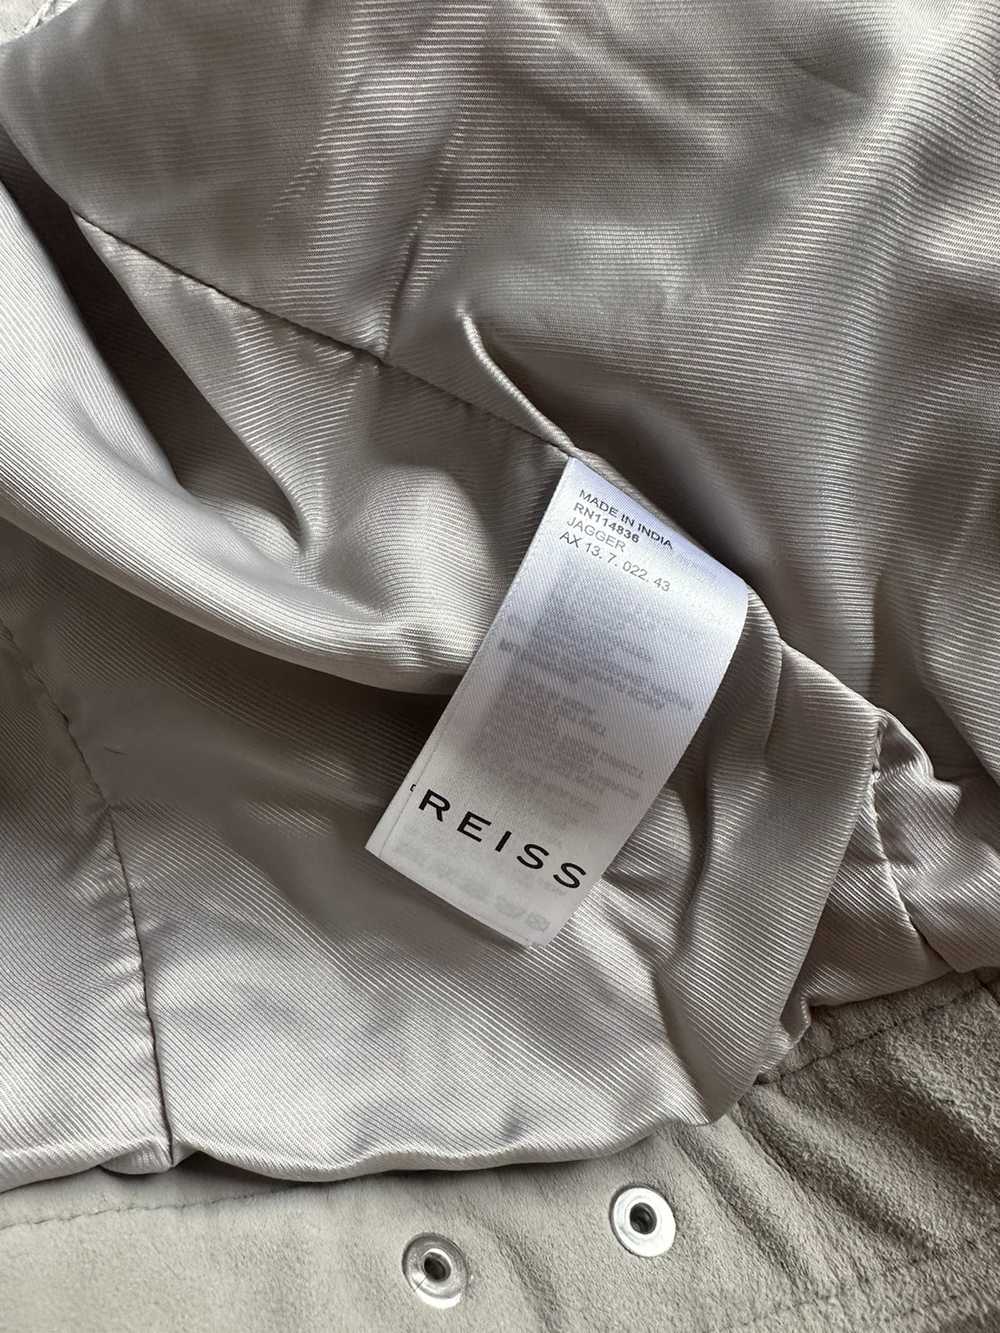 Reiss Reiss Suede Jacket - Mint condition - image 3